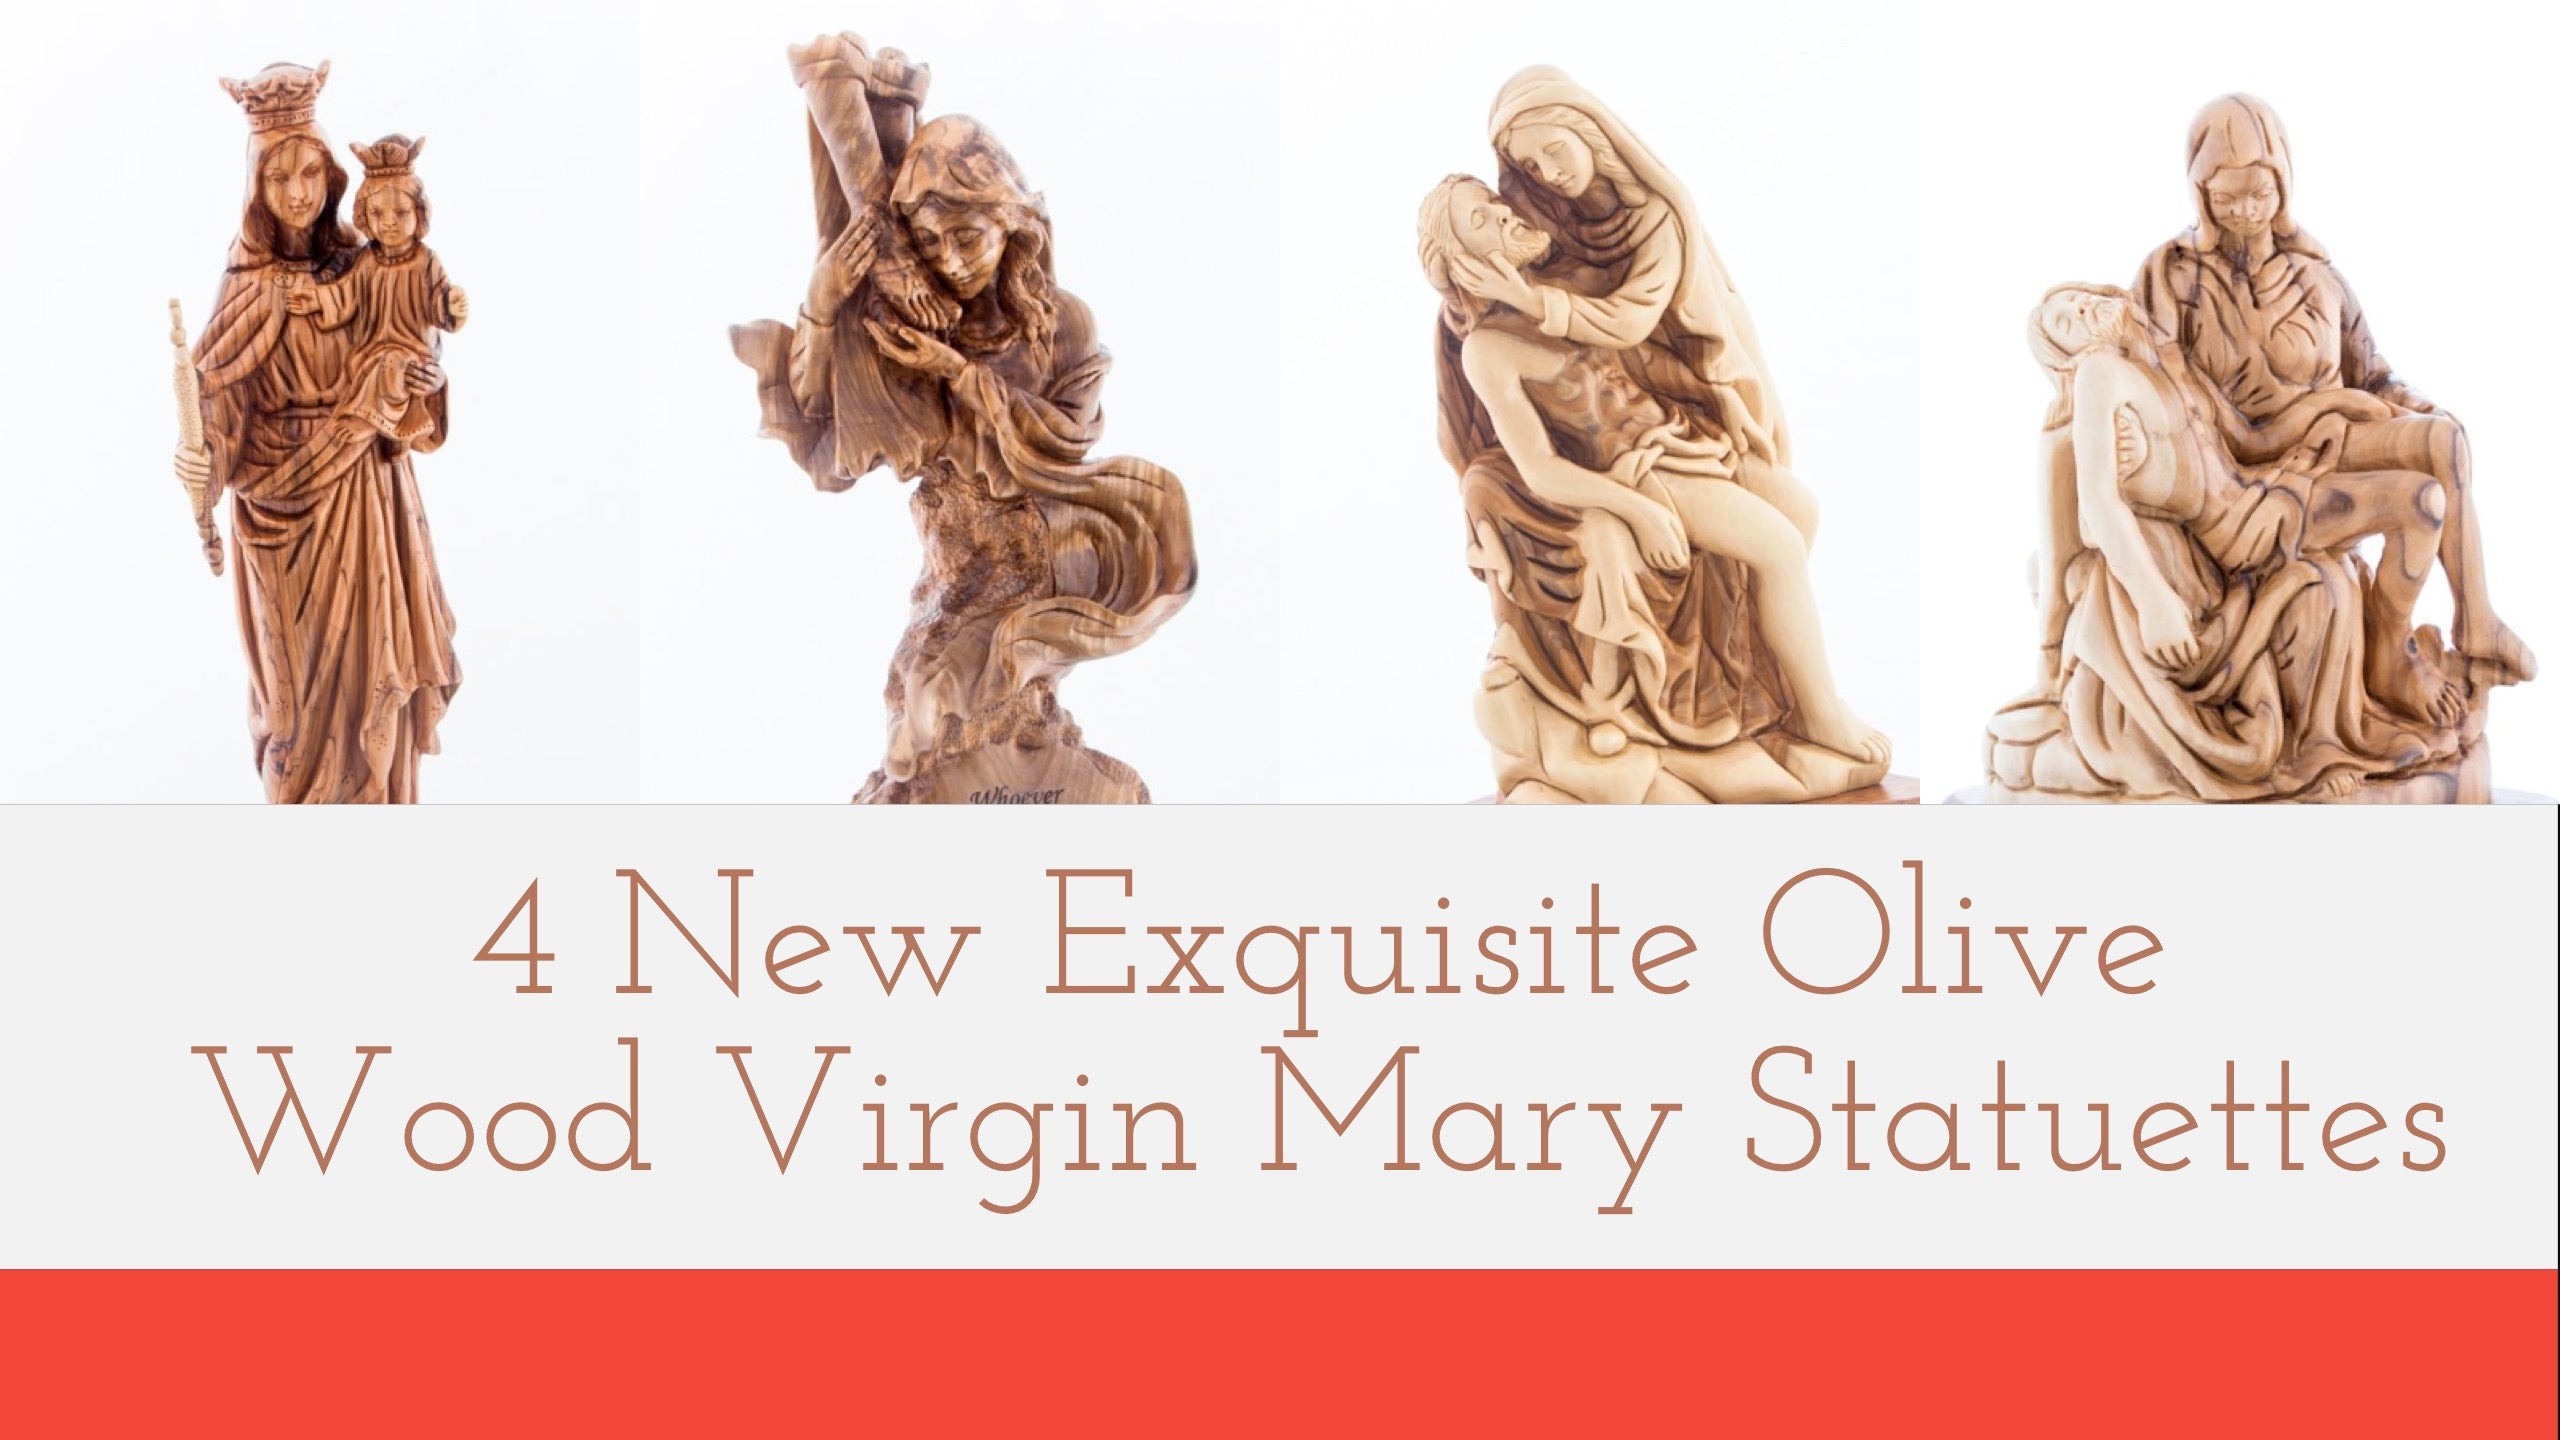 4 New Exquisite Olive Wood Virgin Mary Statues